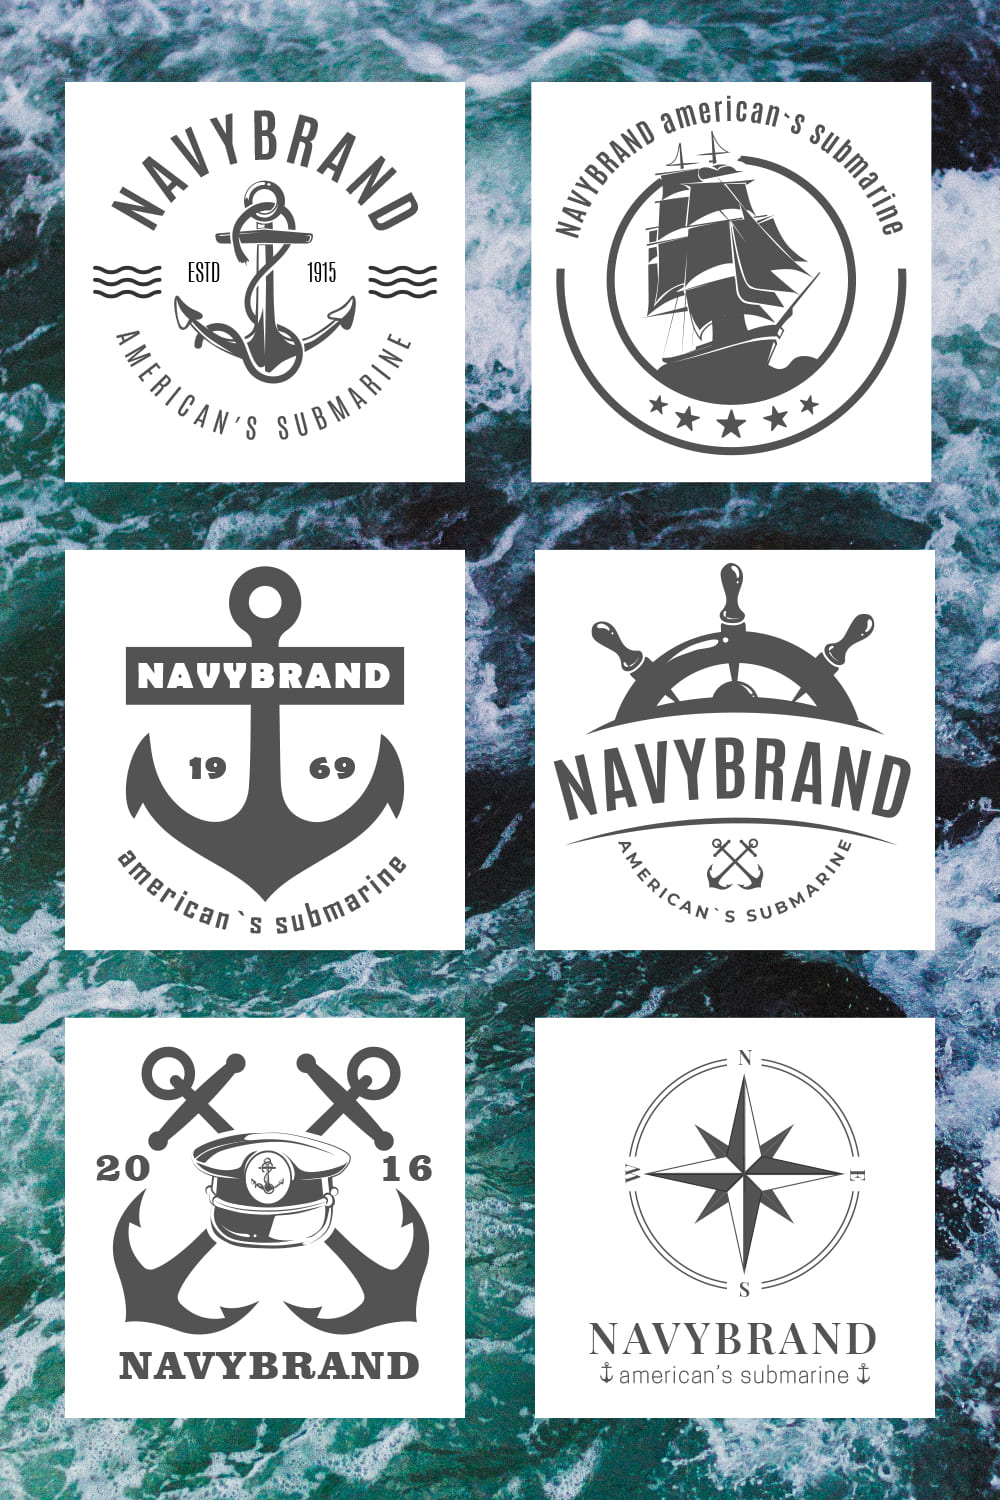 So strong and thematic navy logos.